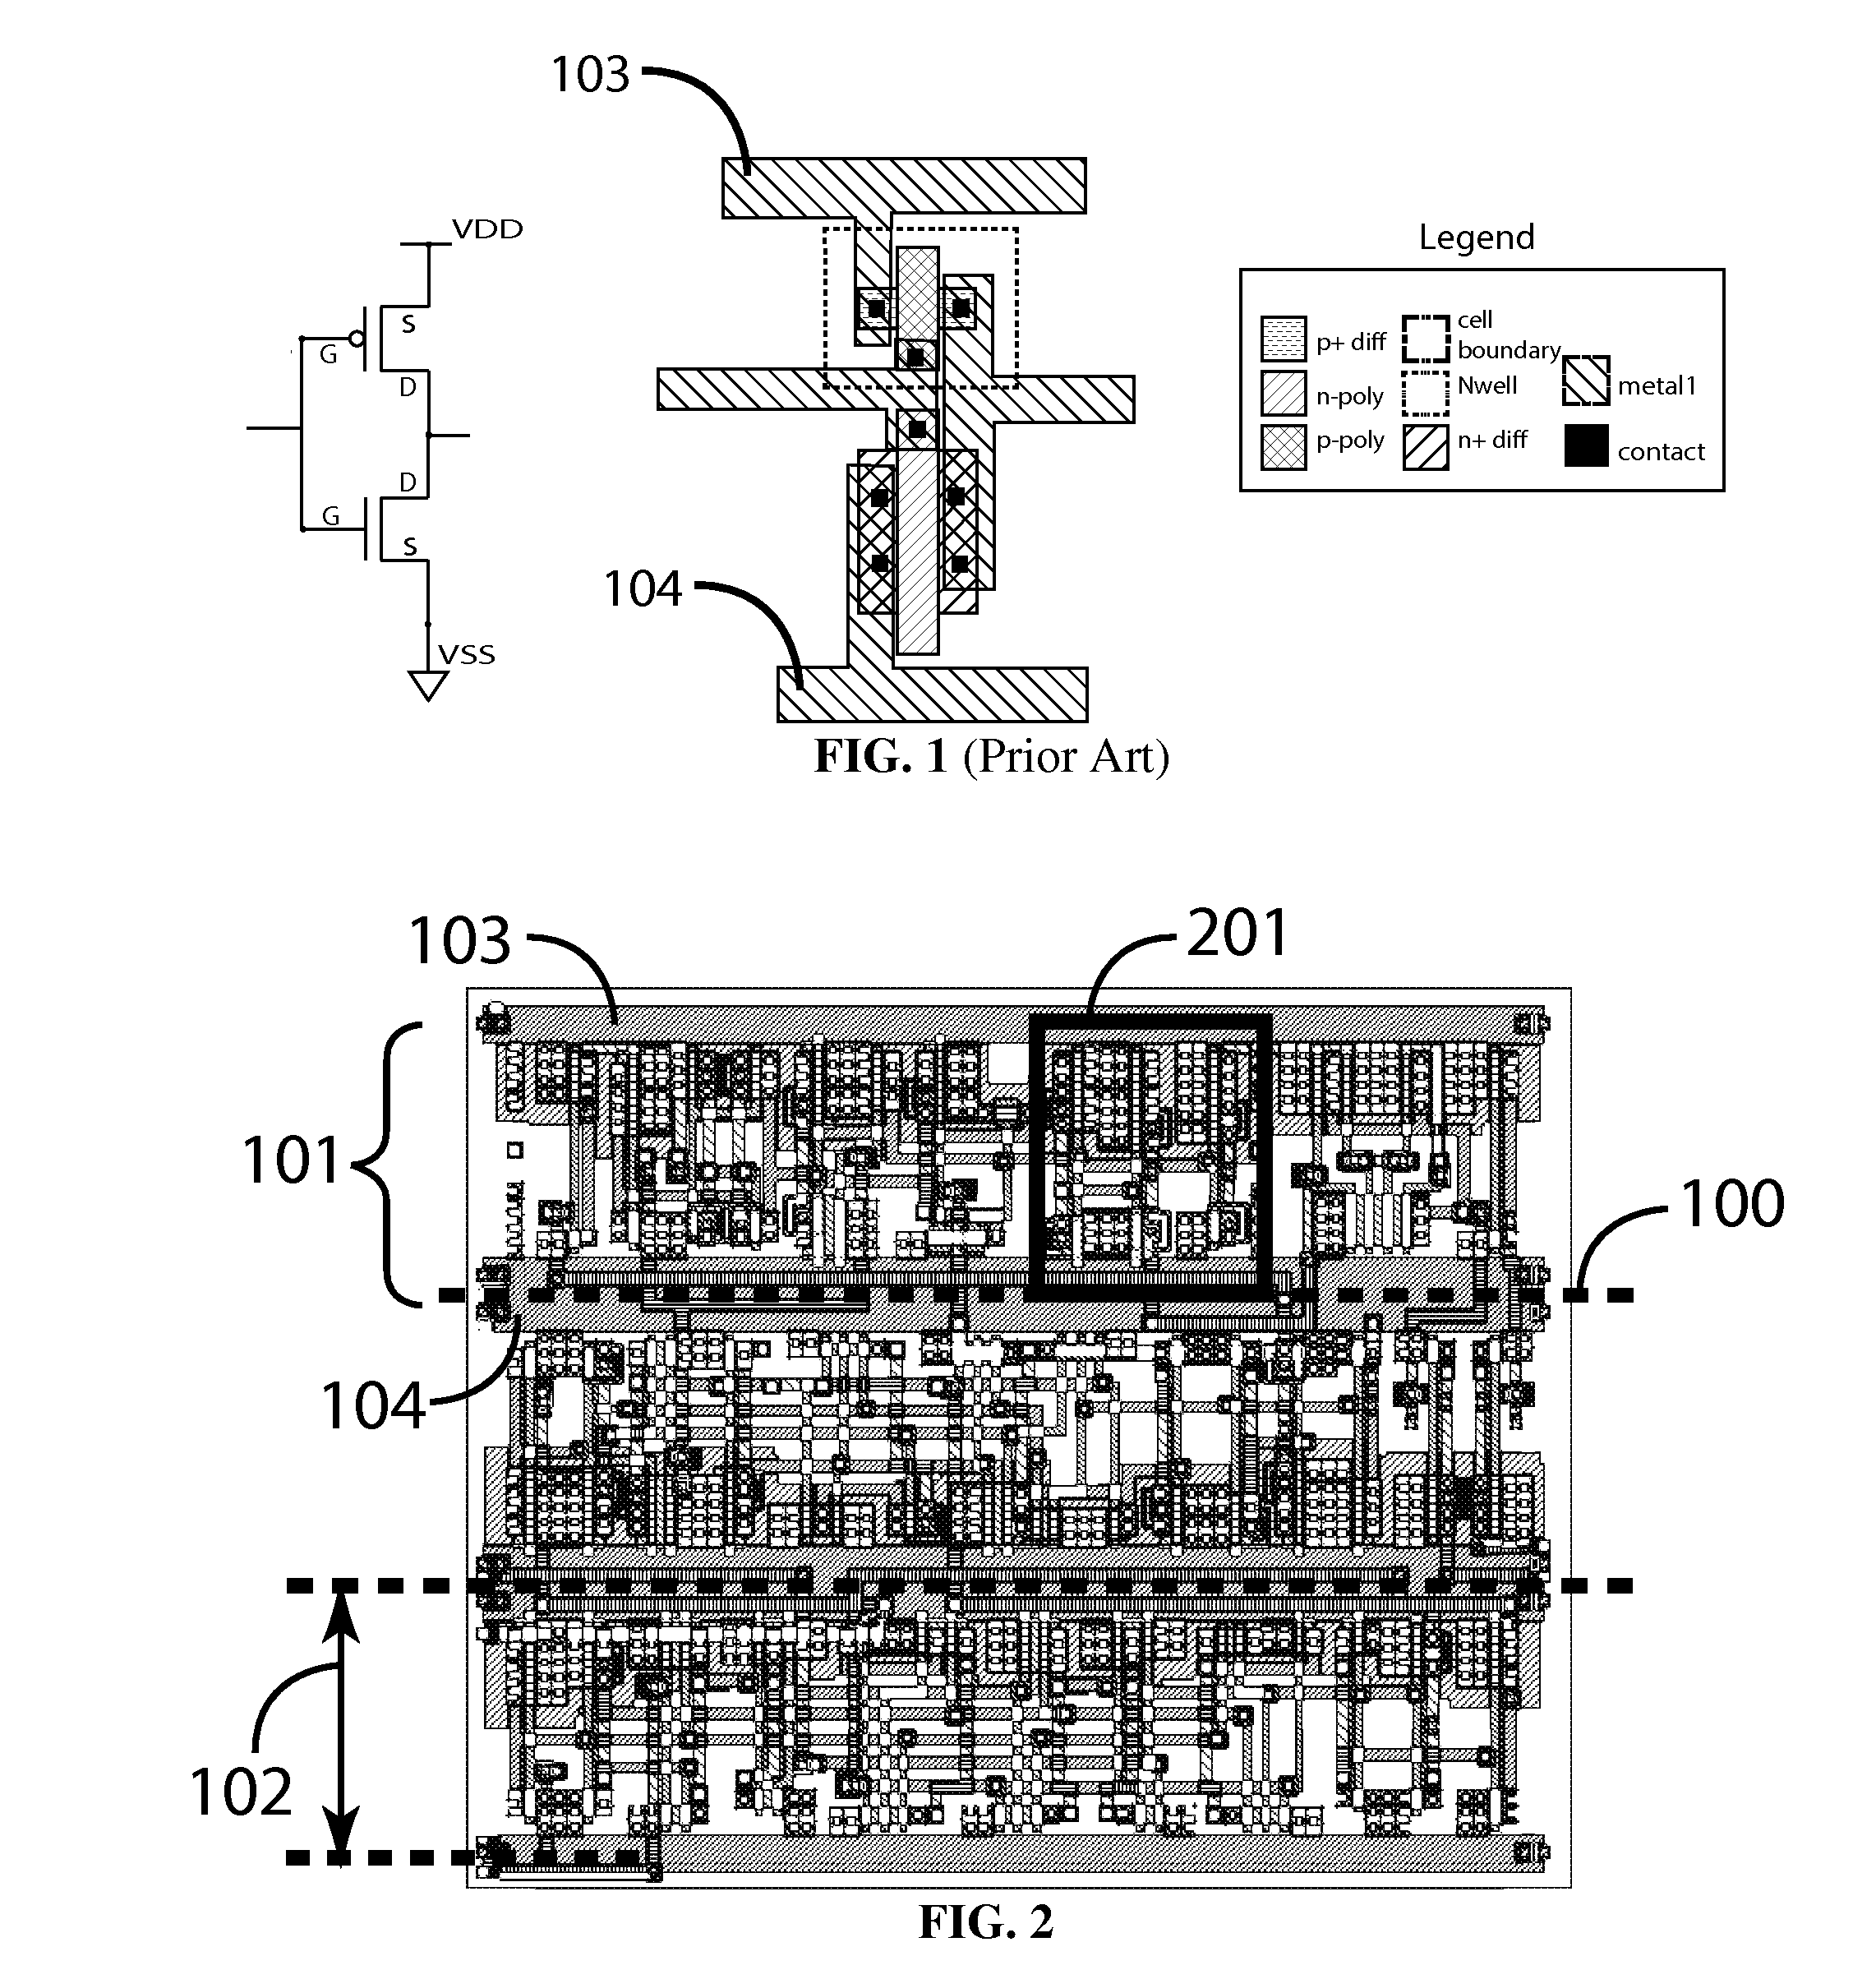 Row Based Analog Standard Cell Layout Design and Methodology